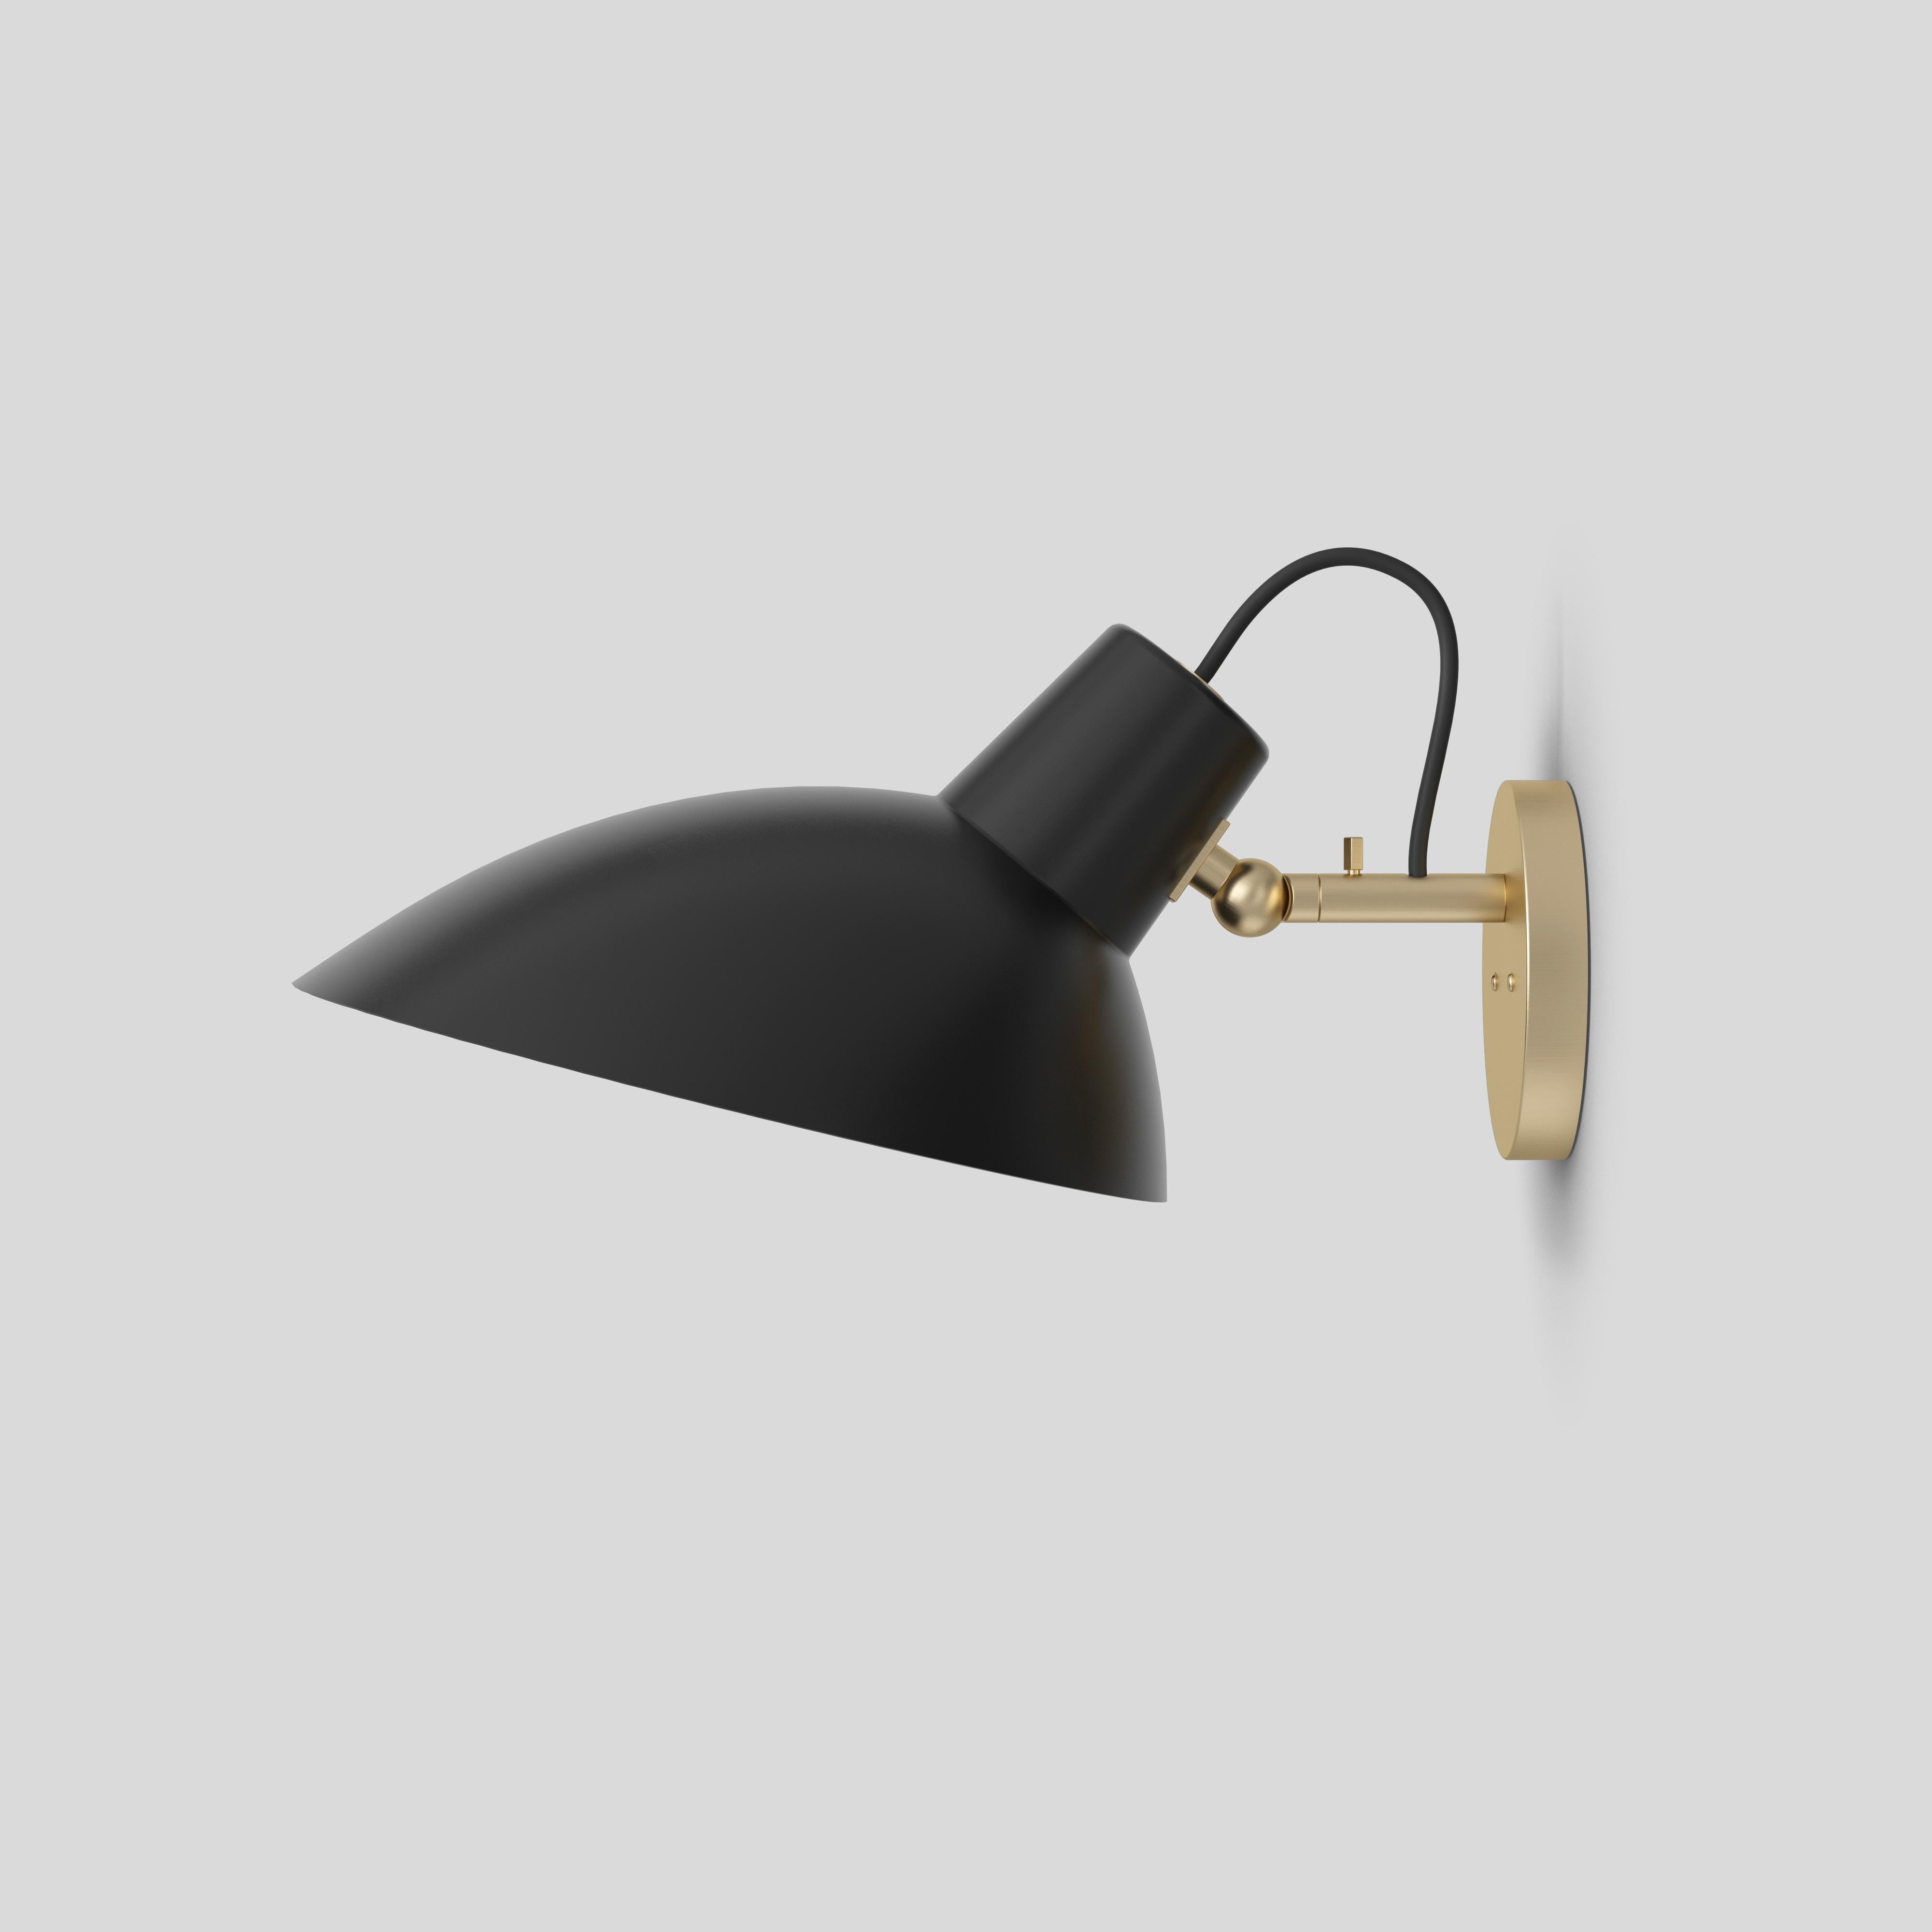 VV Cinquanta wall
Design by Vittoriano Viganò
This version is with black lacquered reflector and brass mount.

The VV Cinquanta features an elegant and versatile posable direct light source that can swivel and tilt. The wall model is mounted on